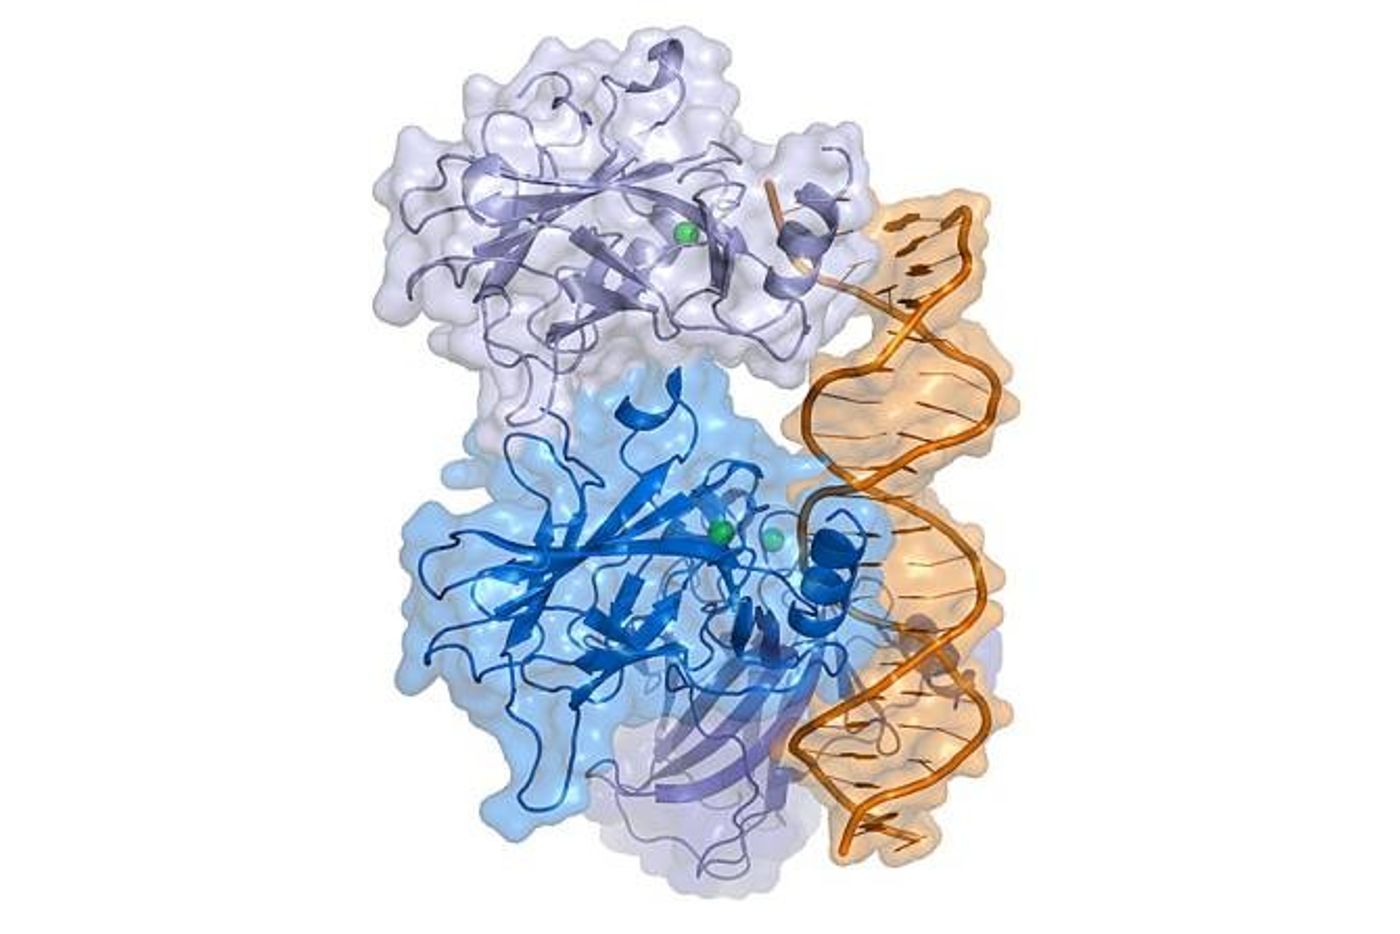 The p53 protein/Credit: Texas Advanced Computing Center